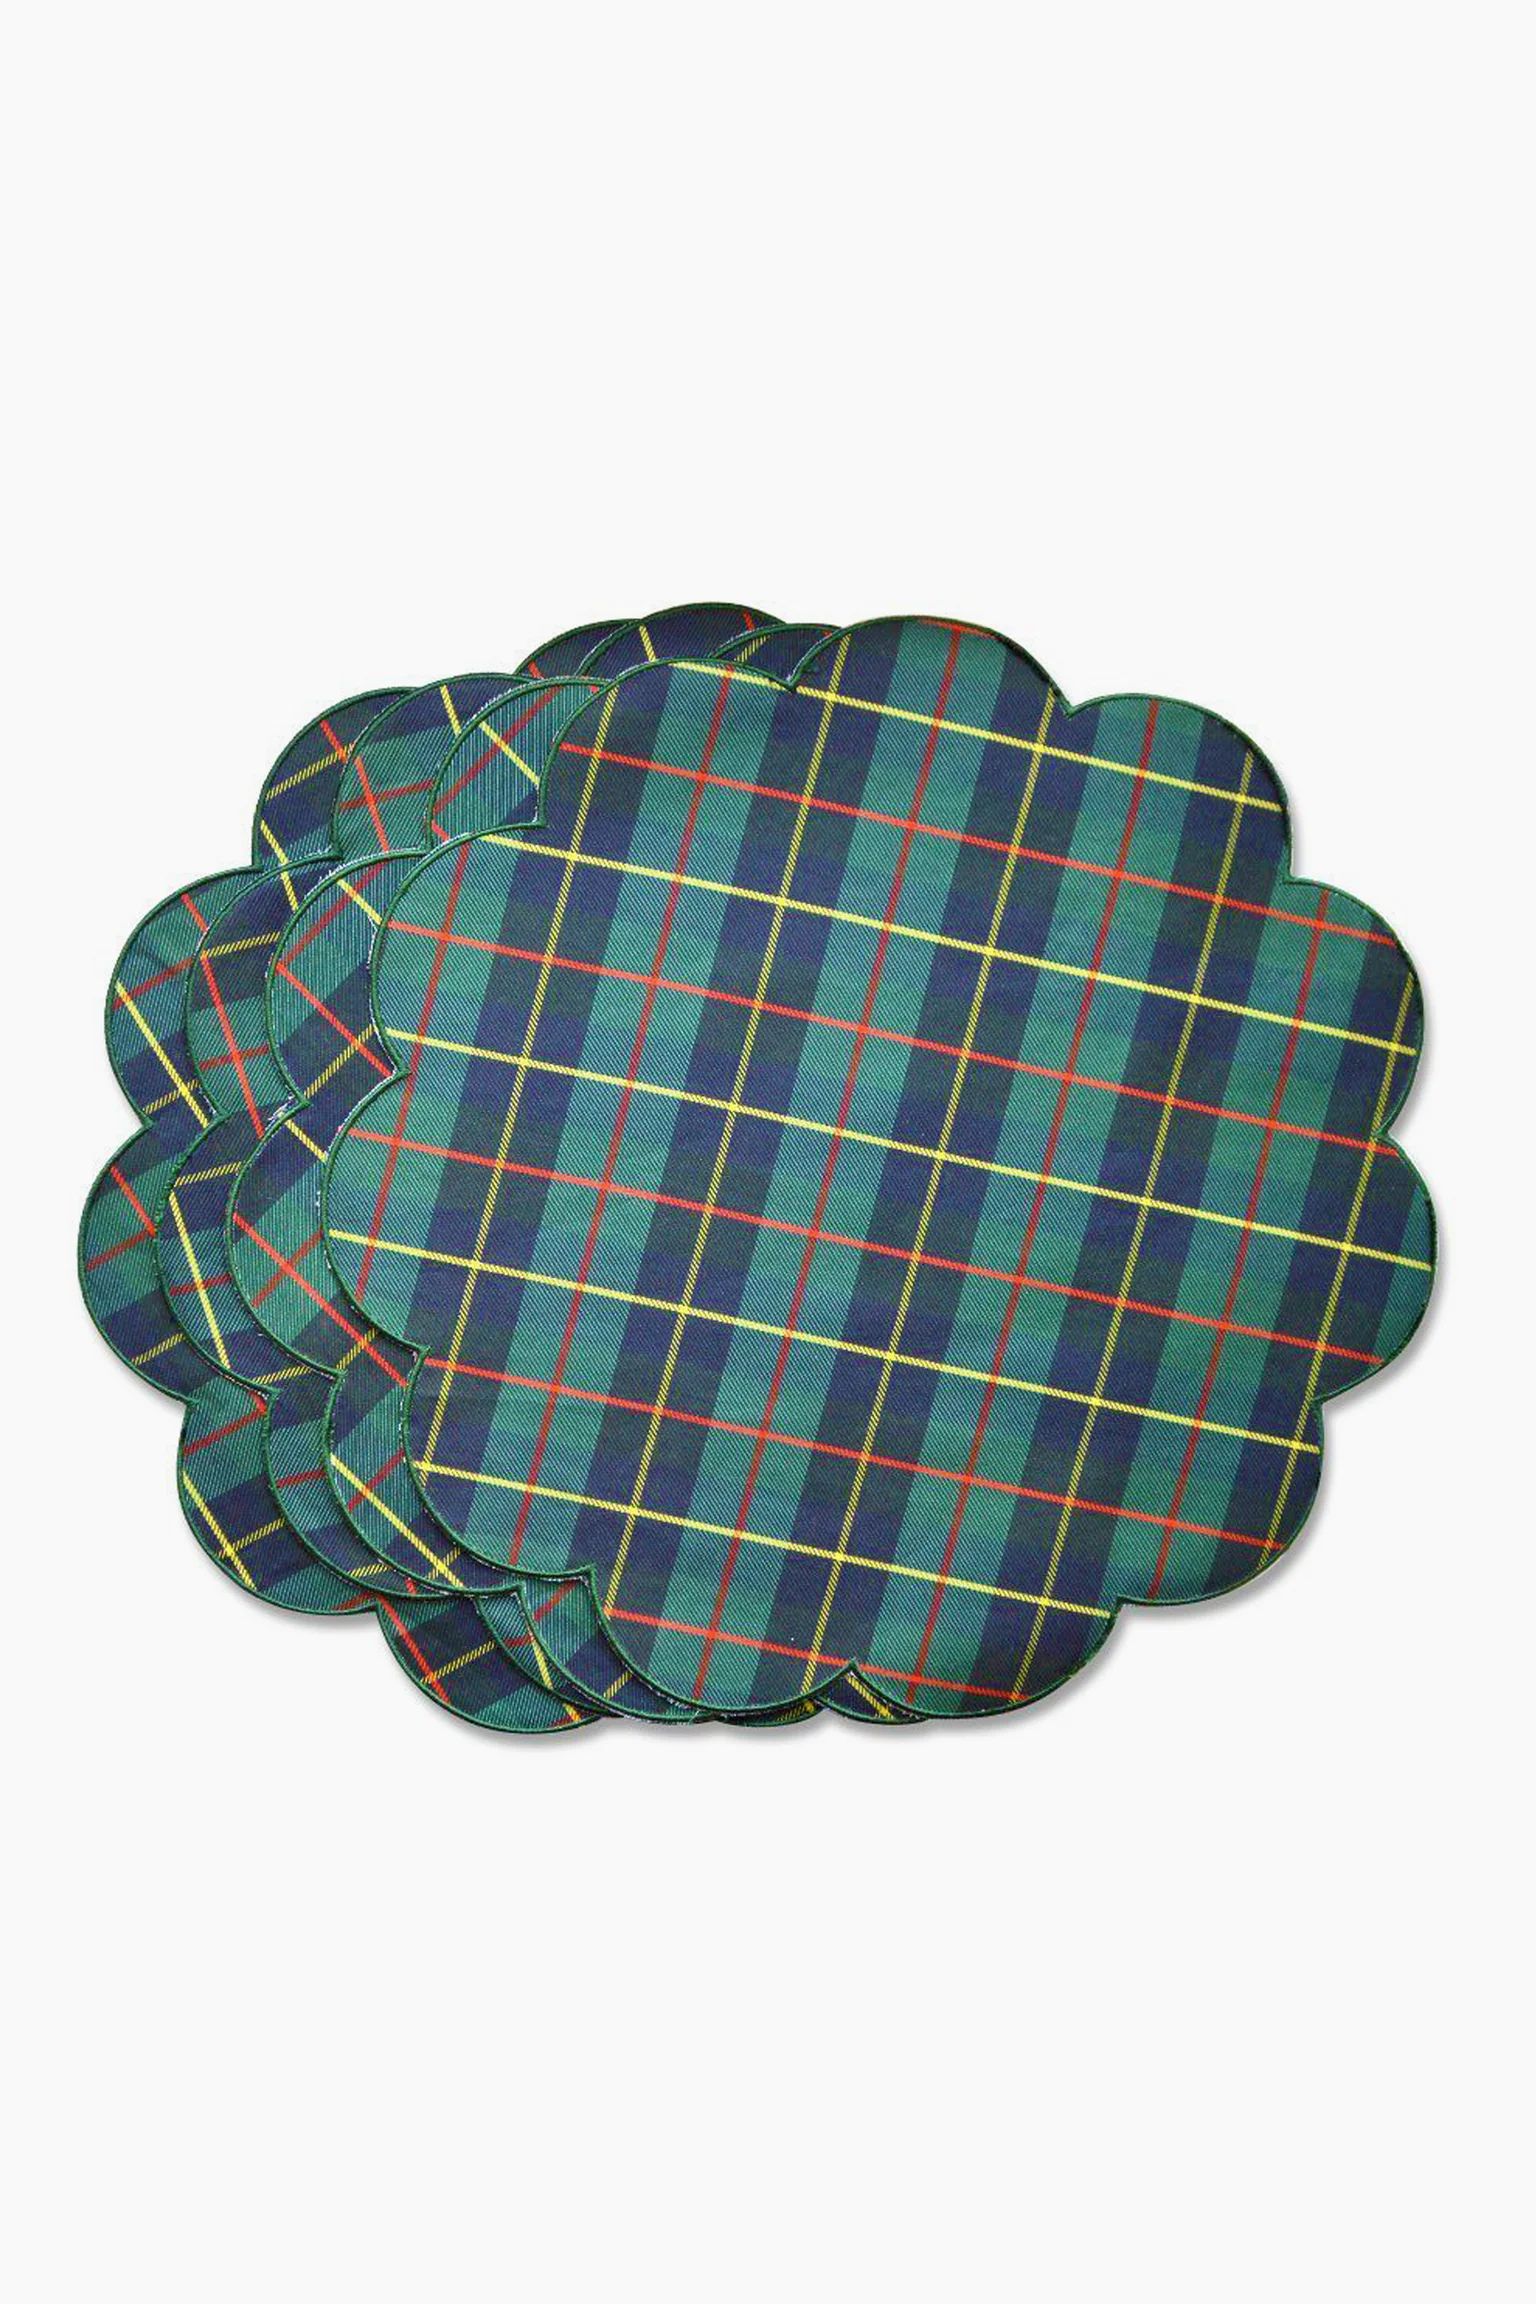 Blue Plaid Style Placemats Set Of 4 | Tuckernuck (US)